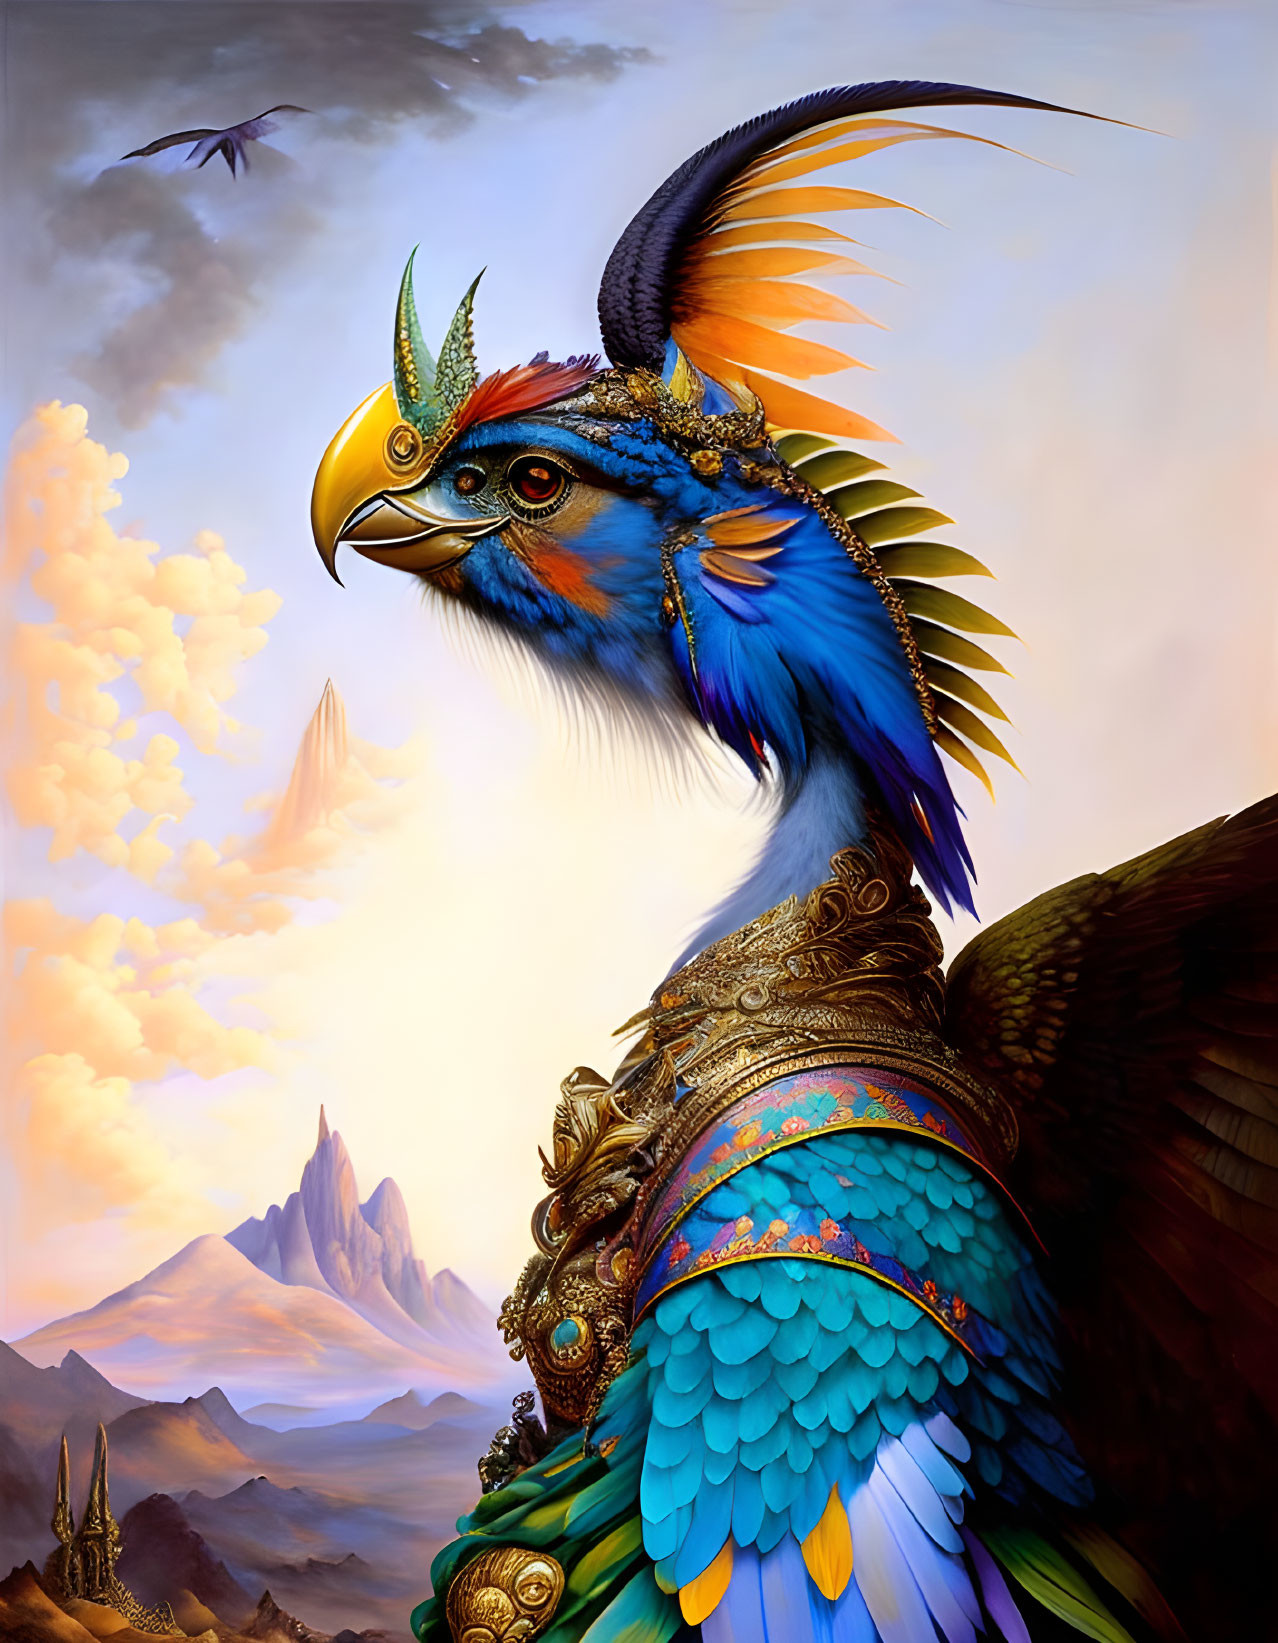 Colorful mythical bird with ornate decorations in mountain landscape